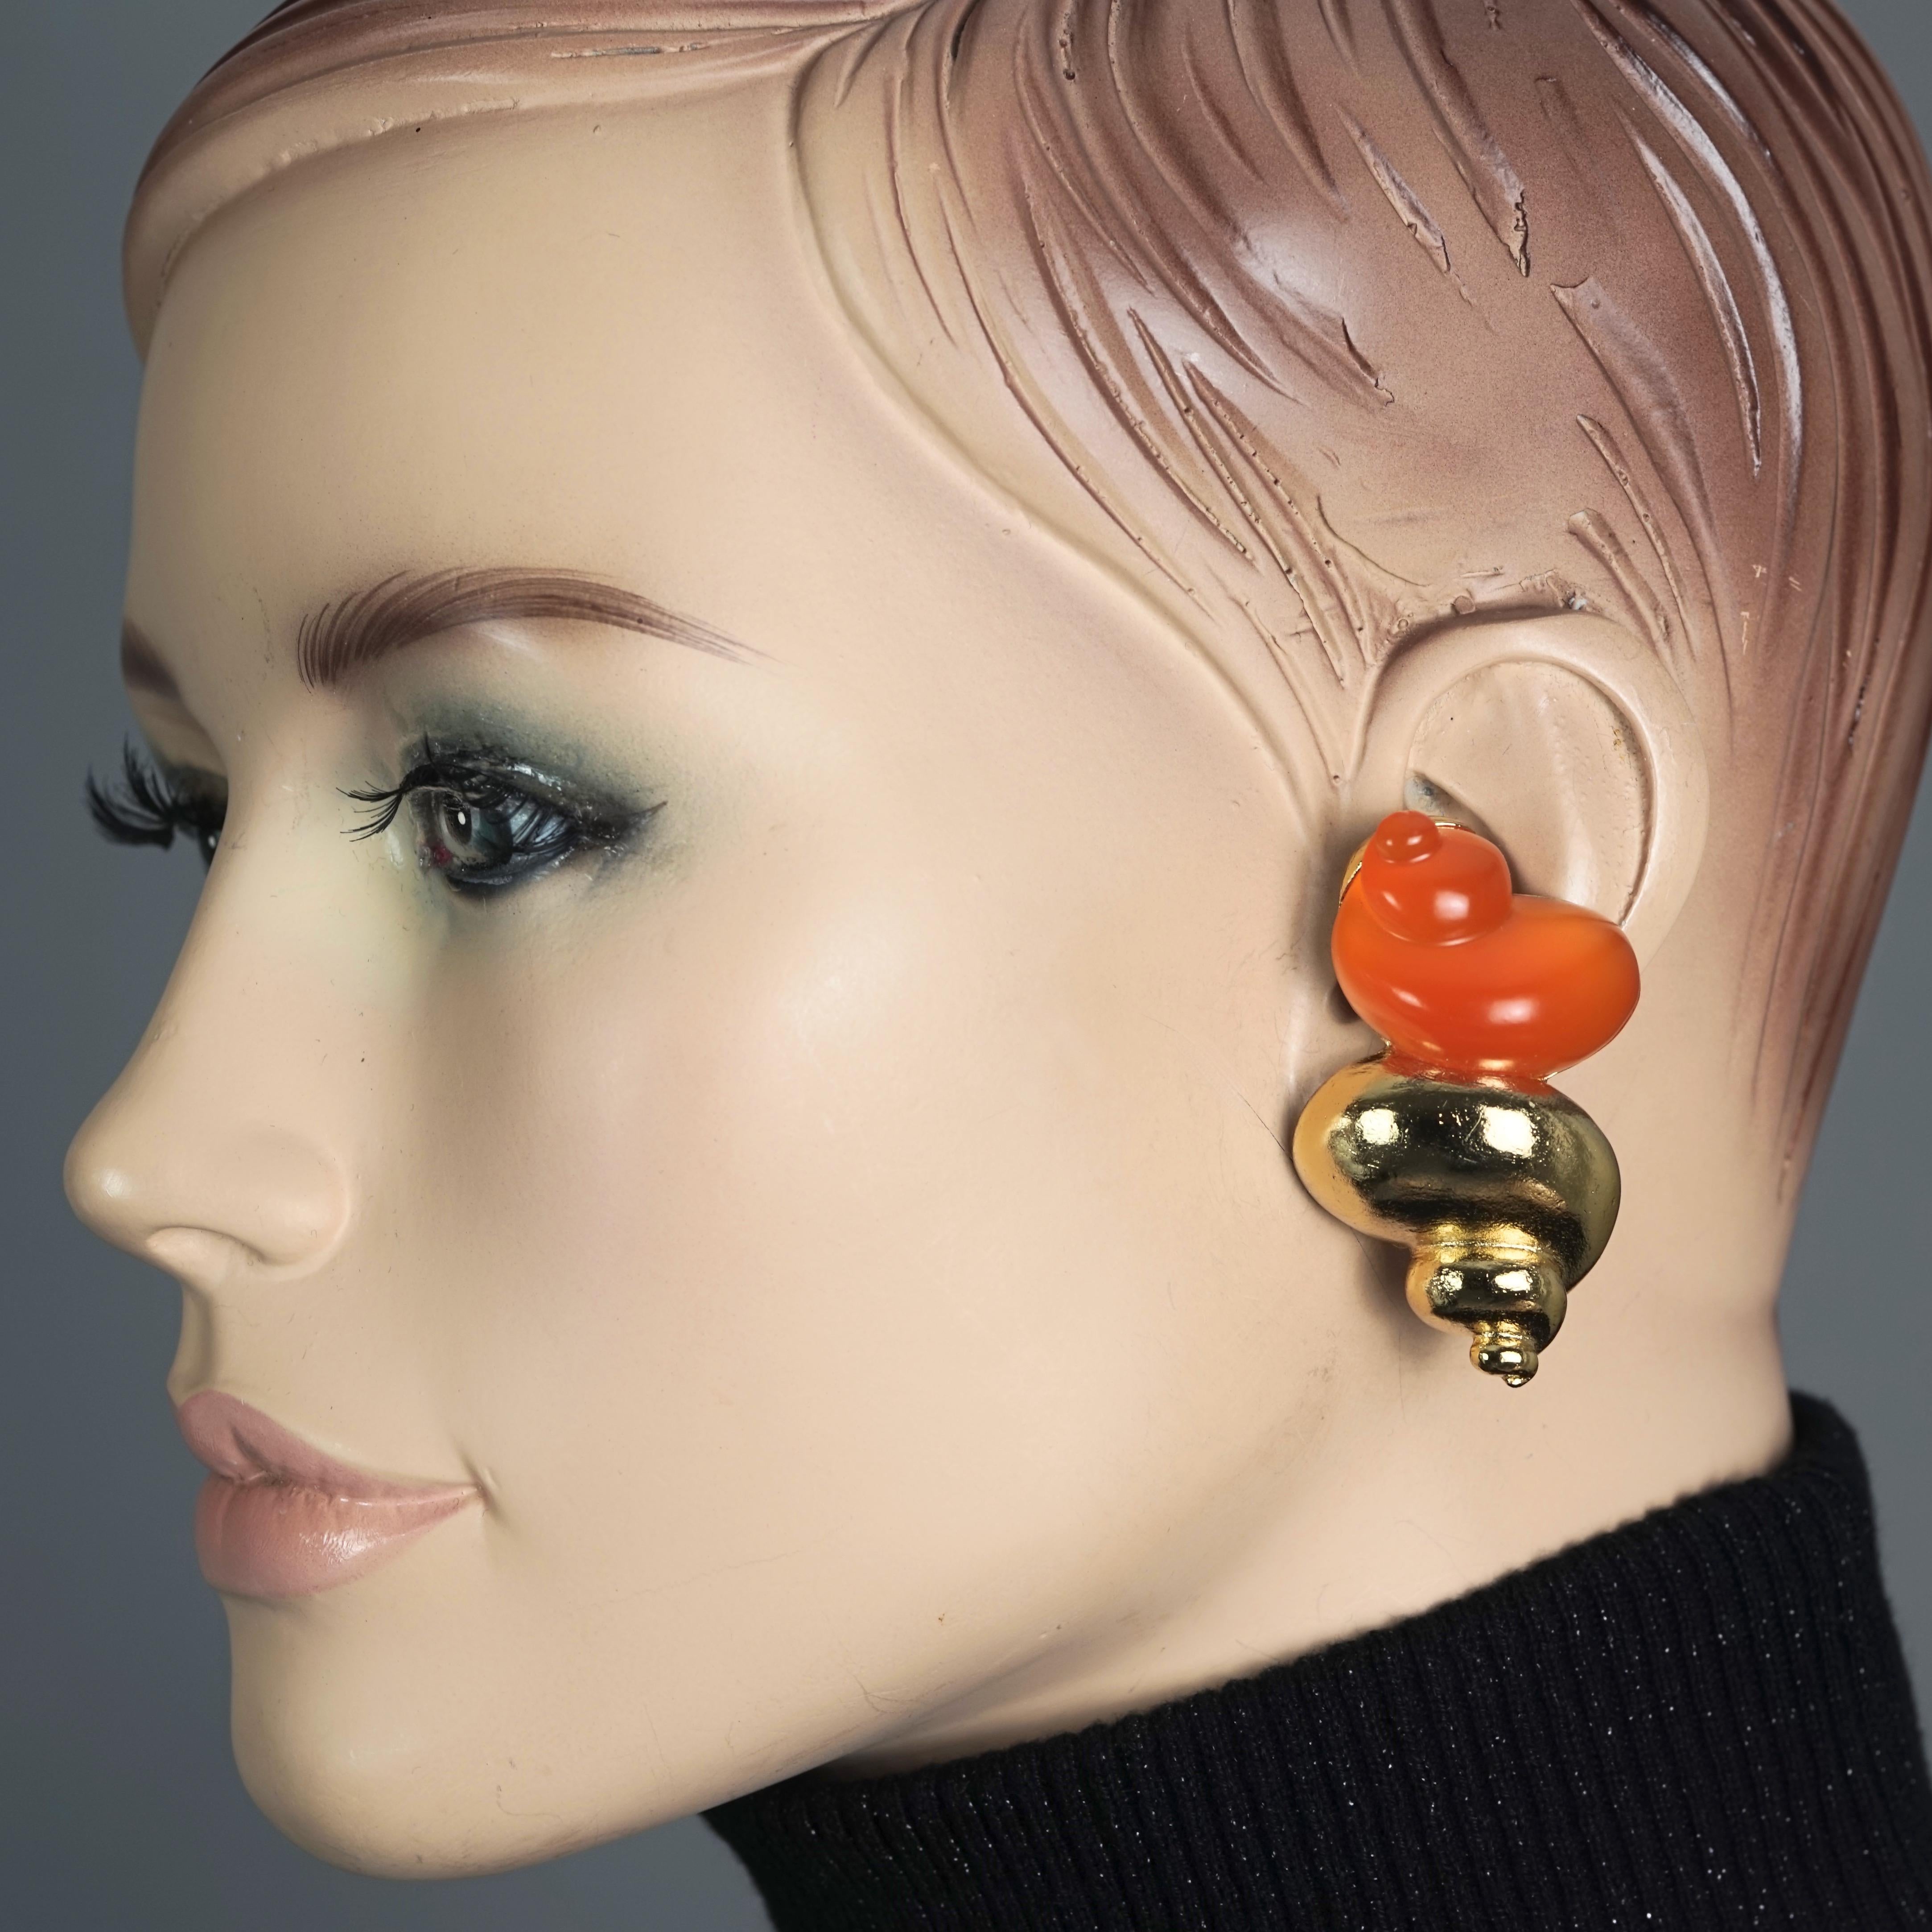 Vintage CHRISTIAN DIOR DUNE by Robert Goossens Shell Earrings
Limited edition Christian Dior earrings designed by Robert Goossens for the perfume DUNE in 1987. 

Measurements:
Height: 2.12 inches (5.4 cm)
Width: 1.25 inches (3.2 cm)
Weight per